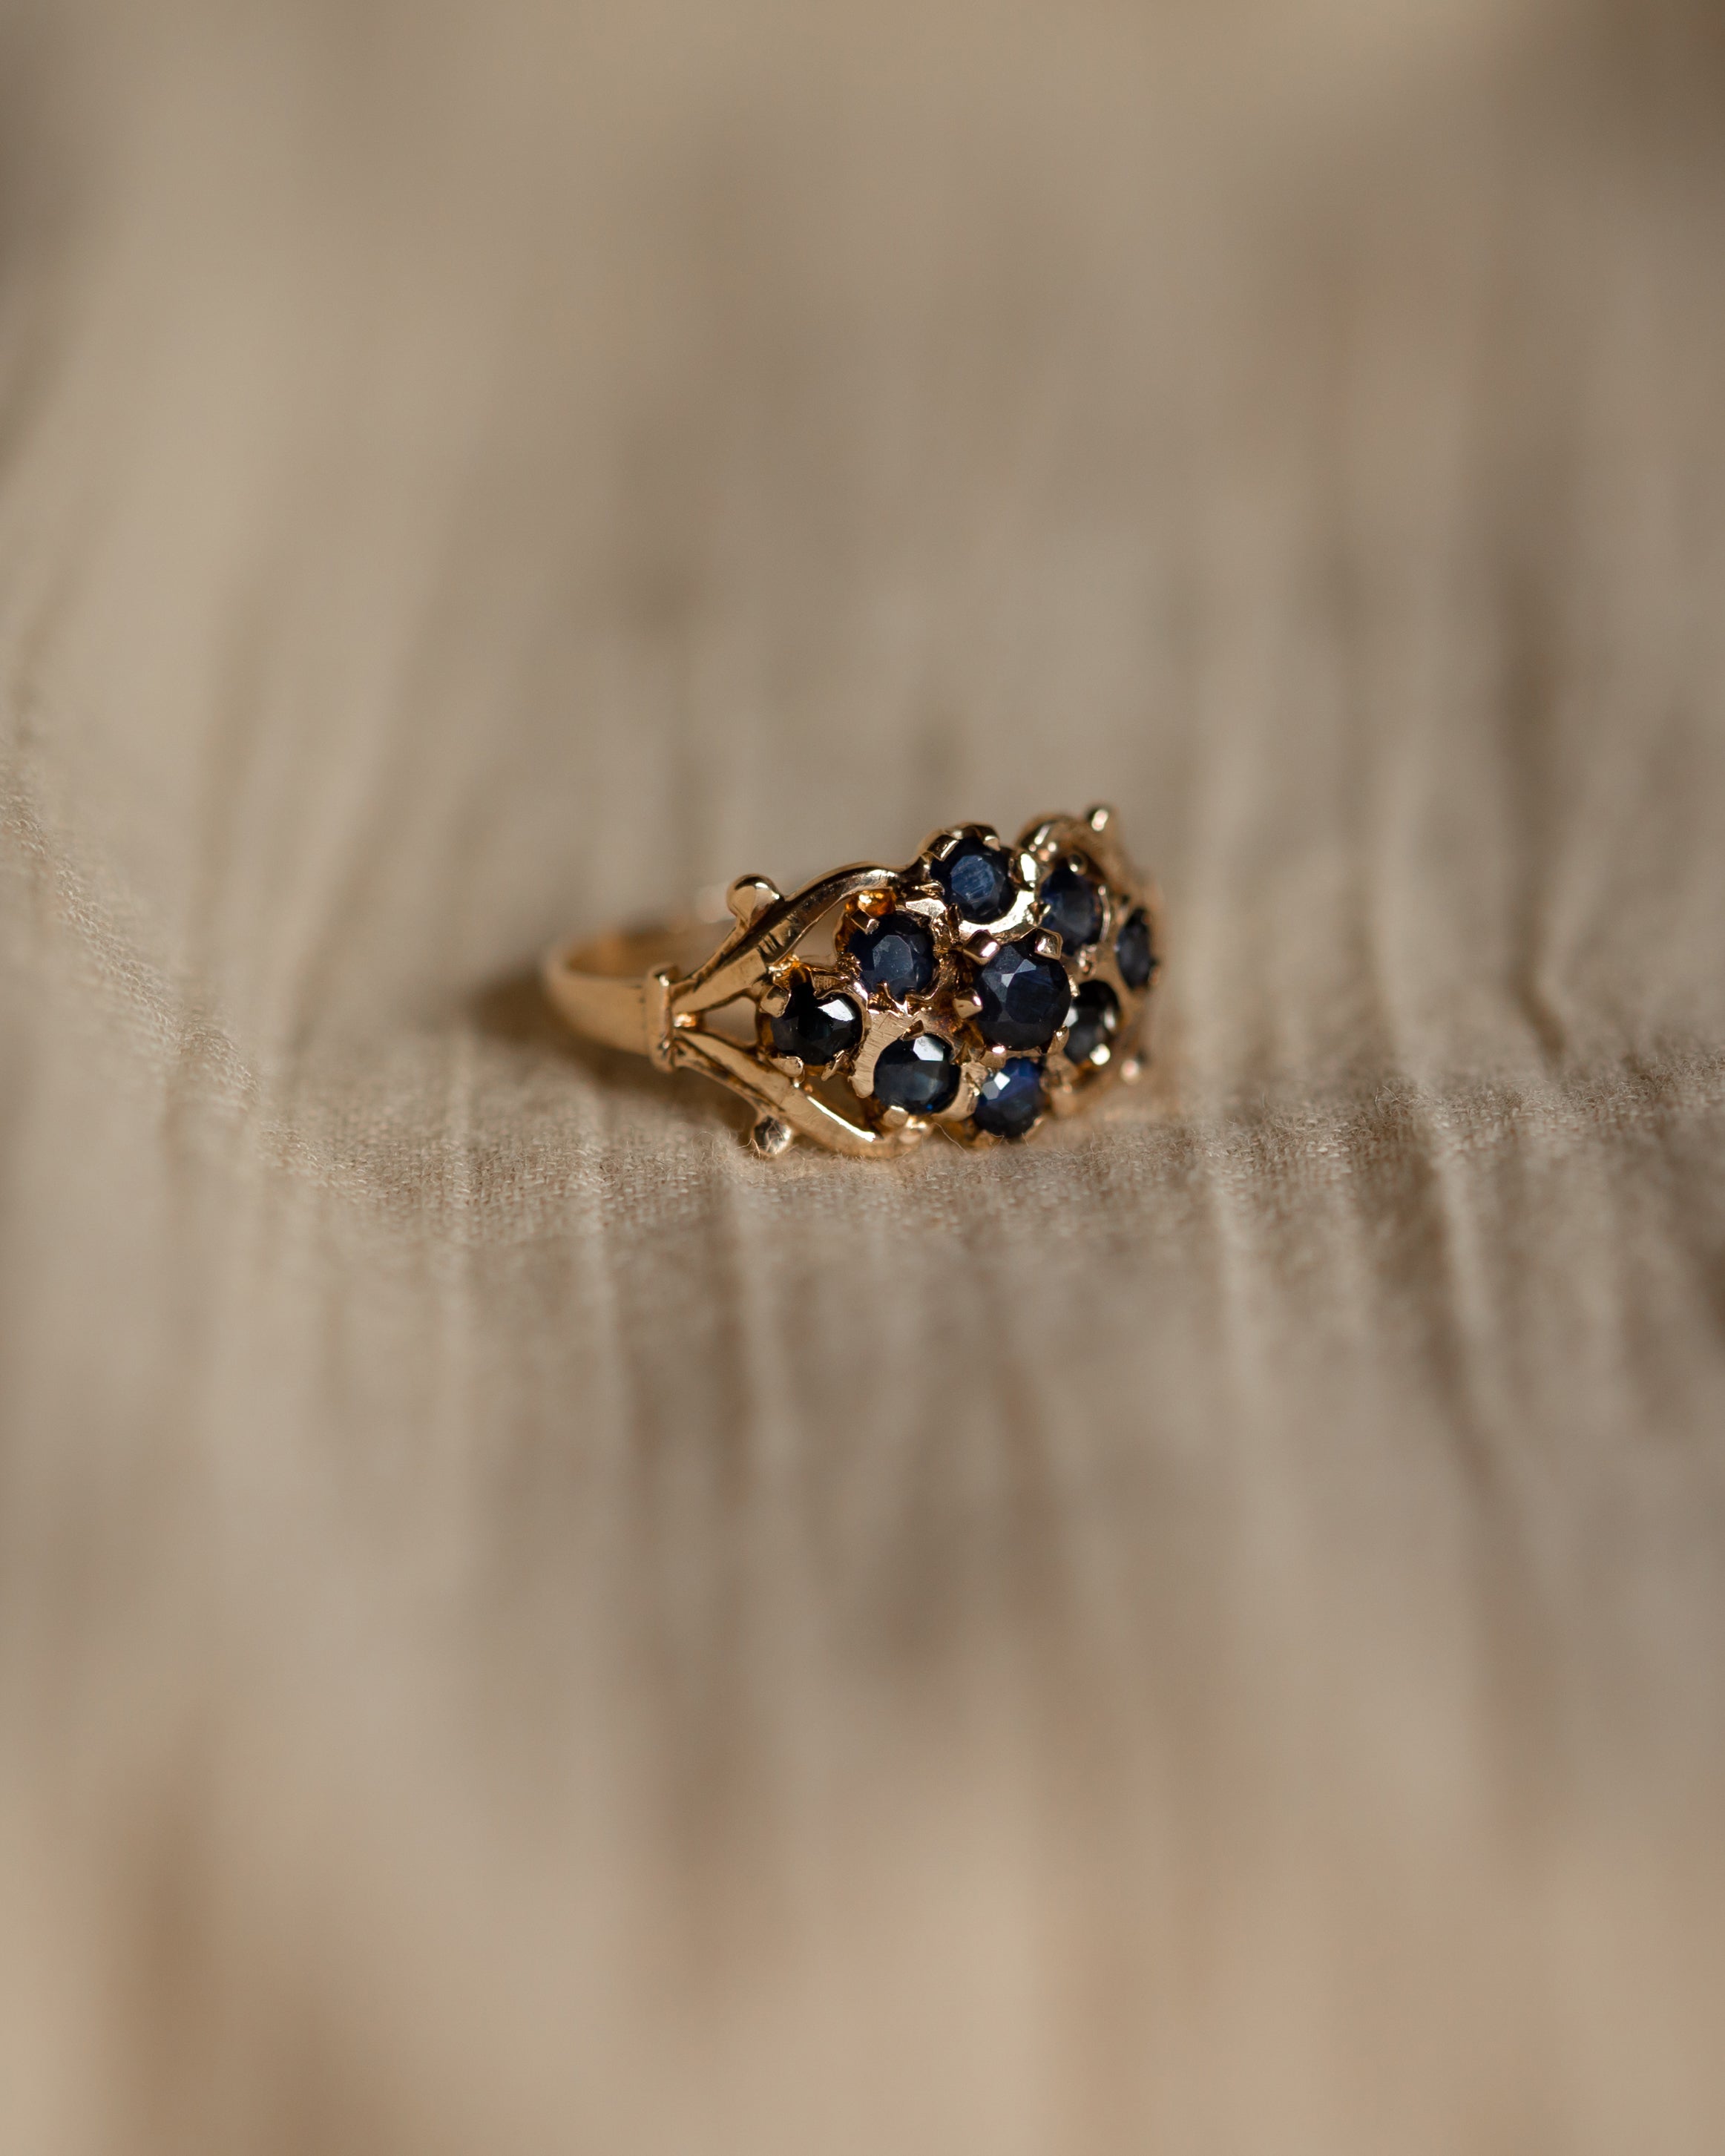 Lois 1978 Vintage 9ct Gold Sapphire Cluster Ring